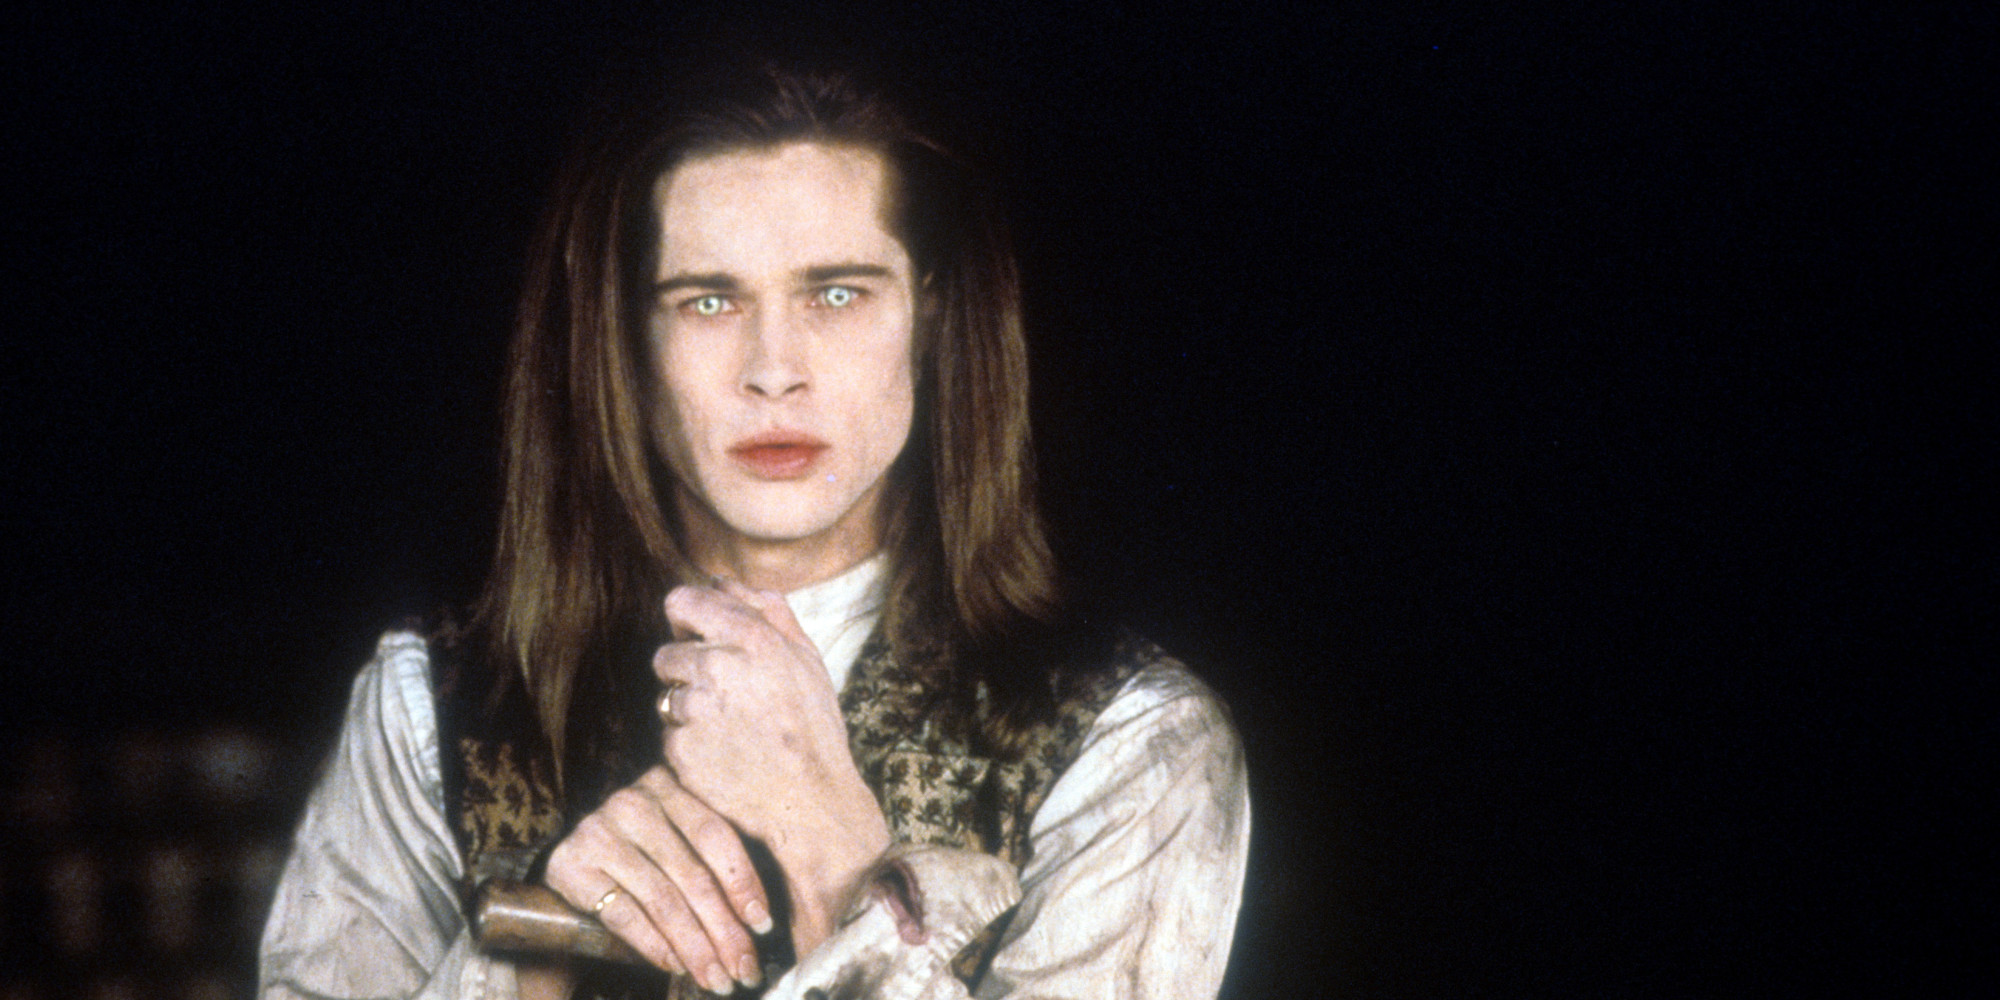 Brad Pitt In 'Interview With The Vampire: The Vampire Chronicles'